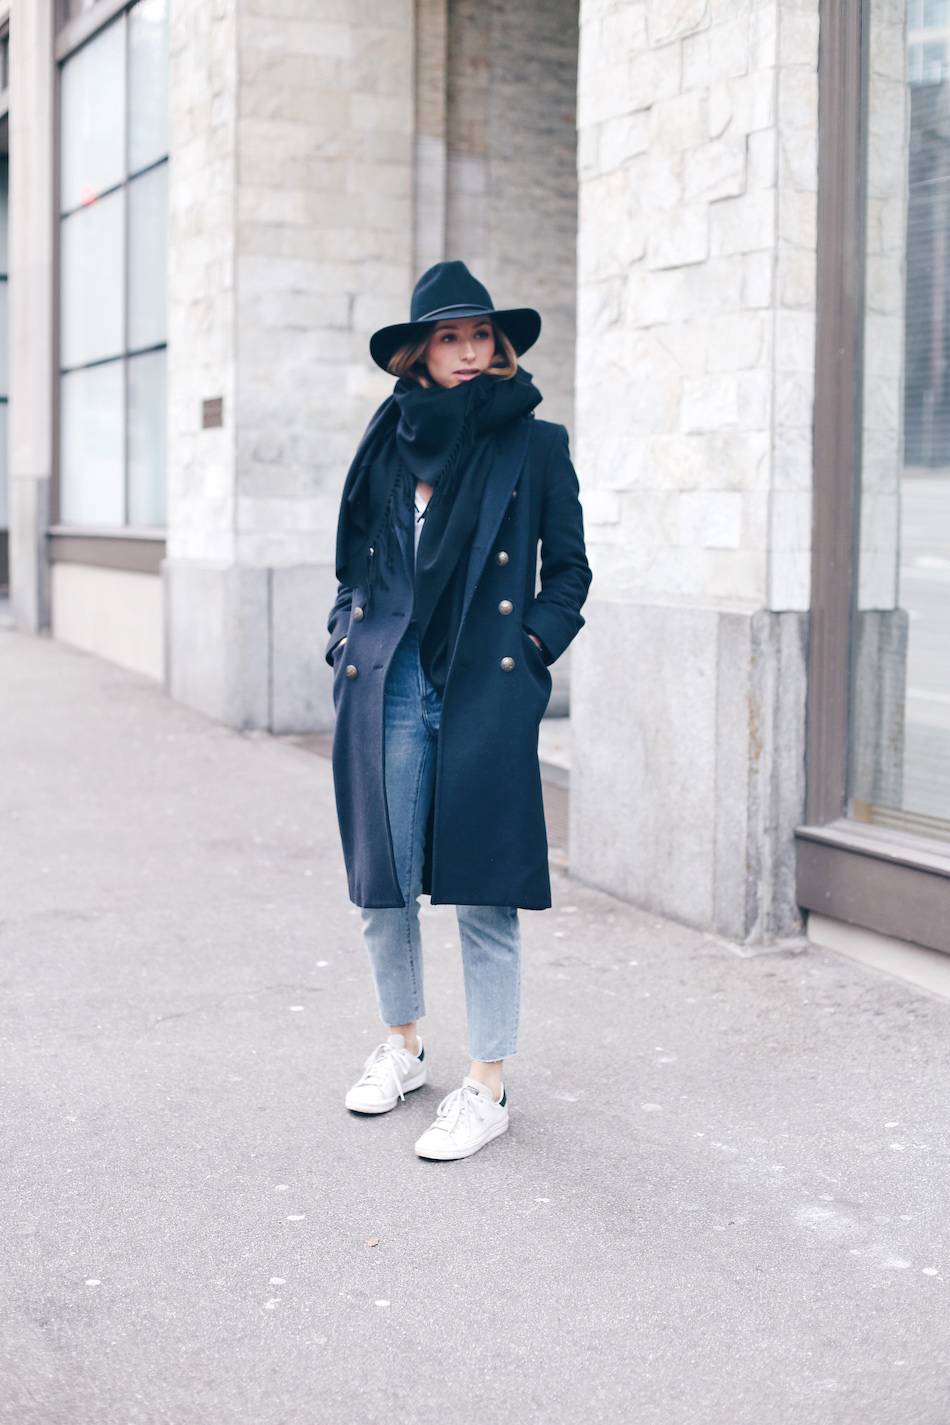 3 tips on wearing black and navy together